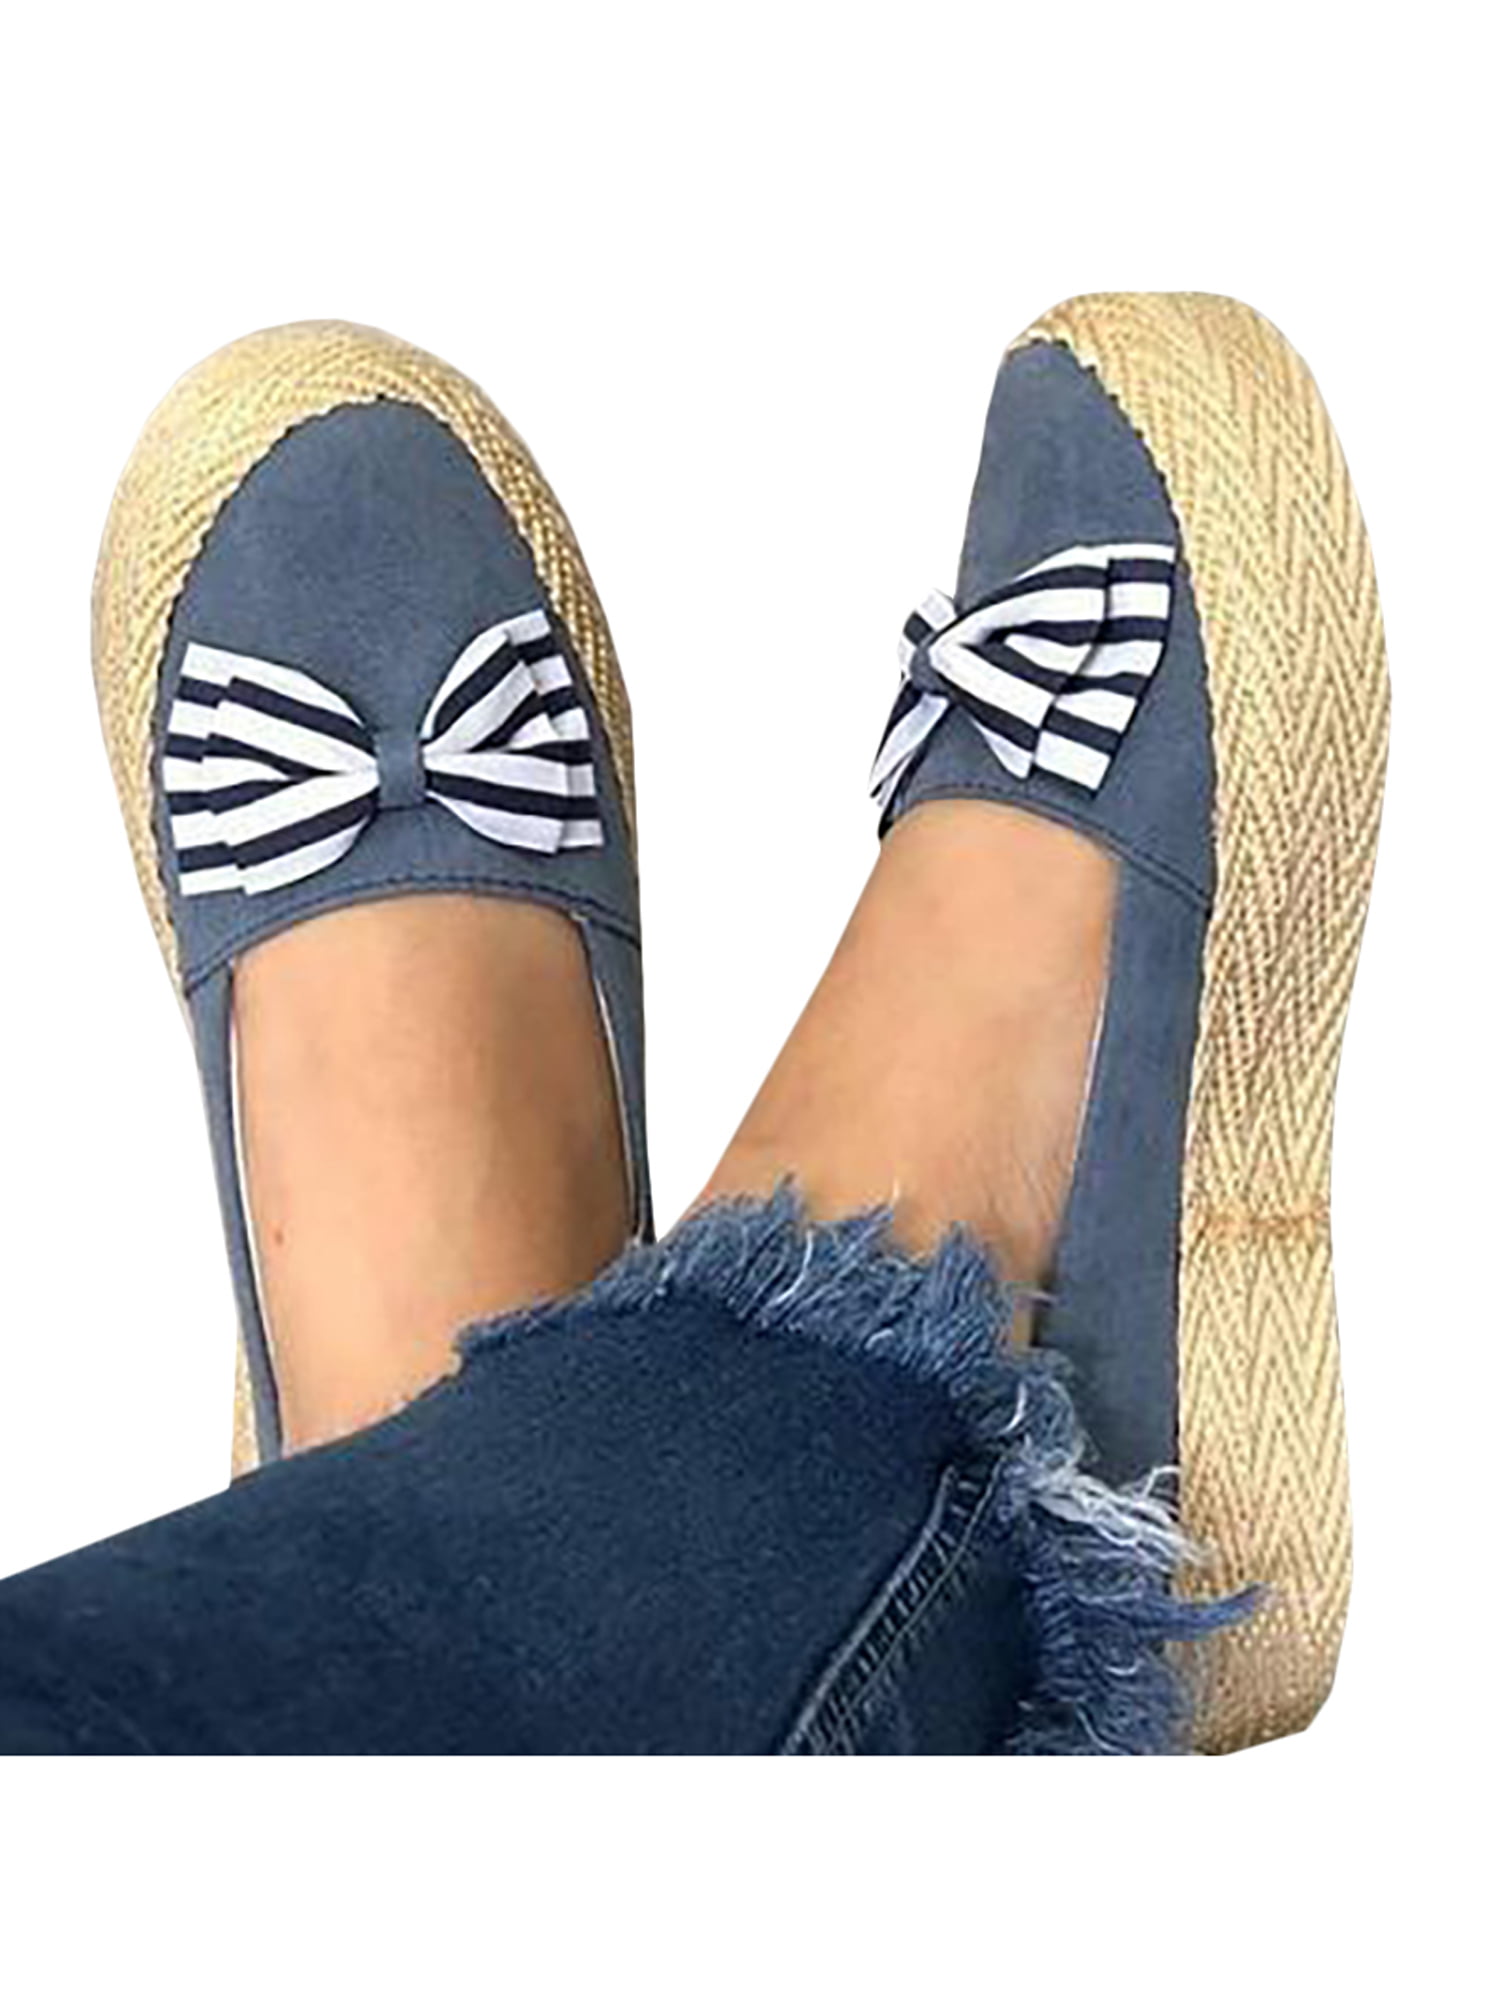 womens casual slip on loafers